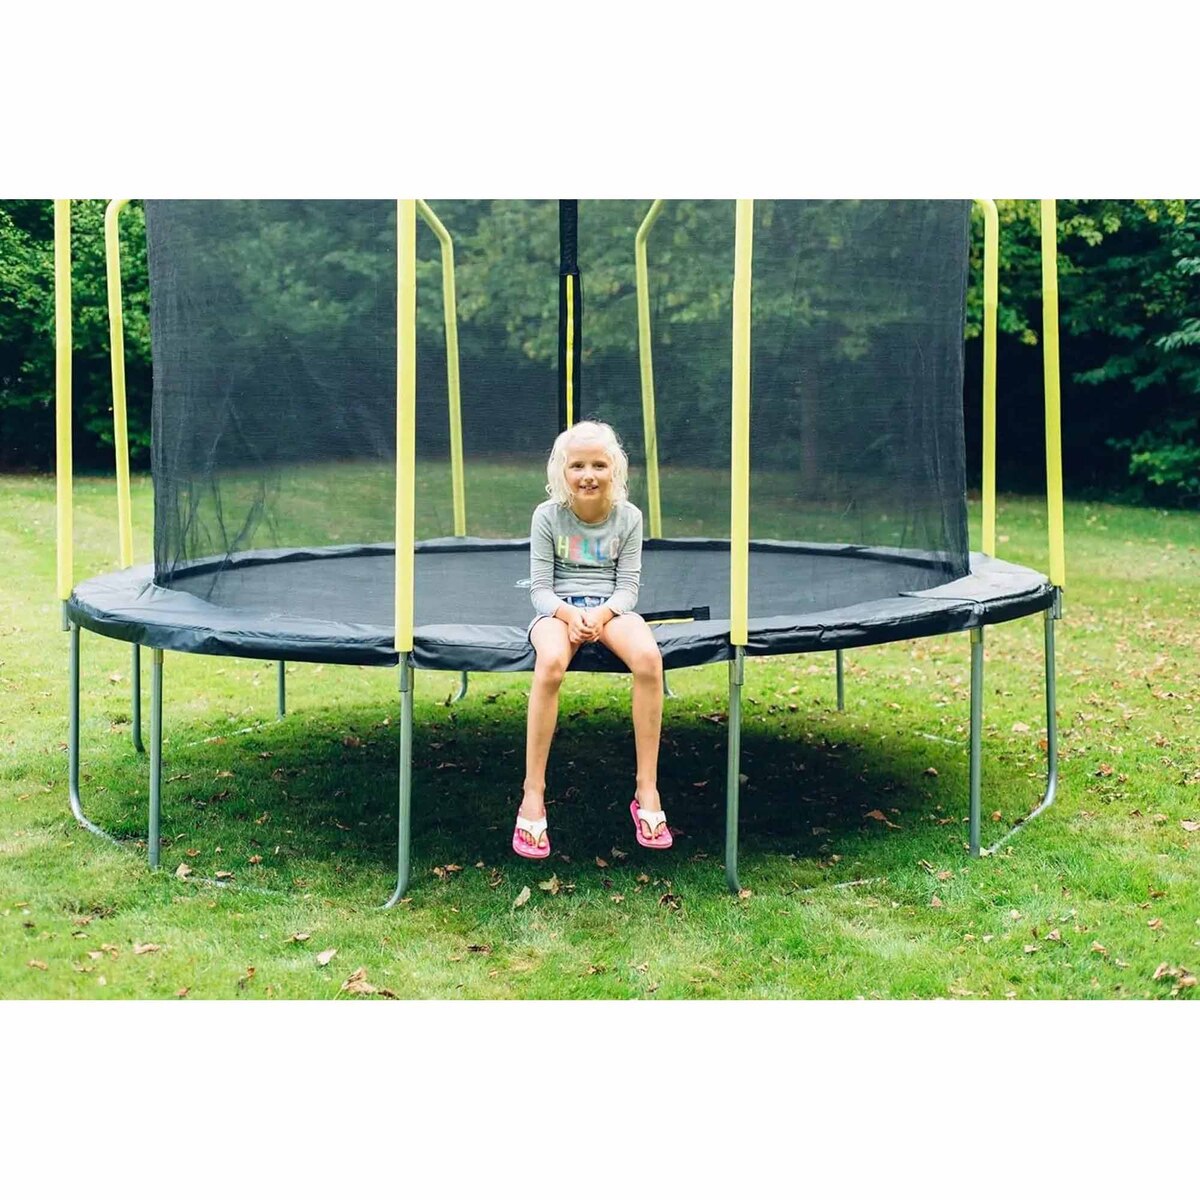 Plum Springsafe Fun Trampoline With Safety Enclosure, 10 ft, 30378AC82